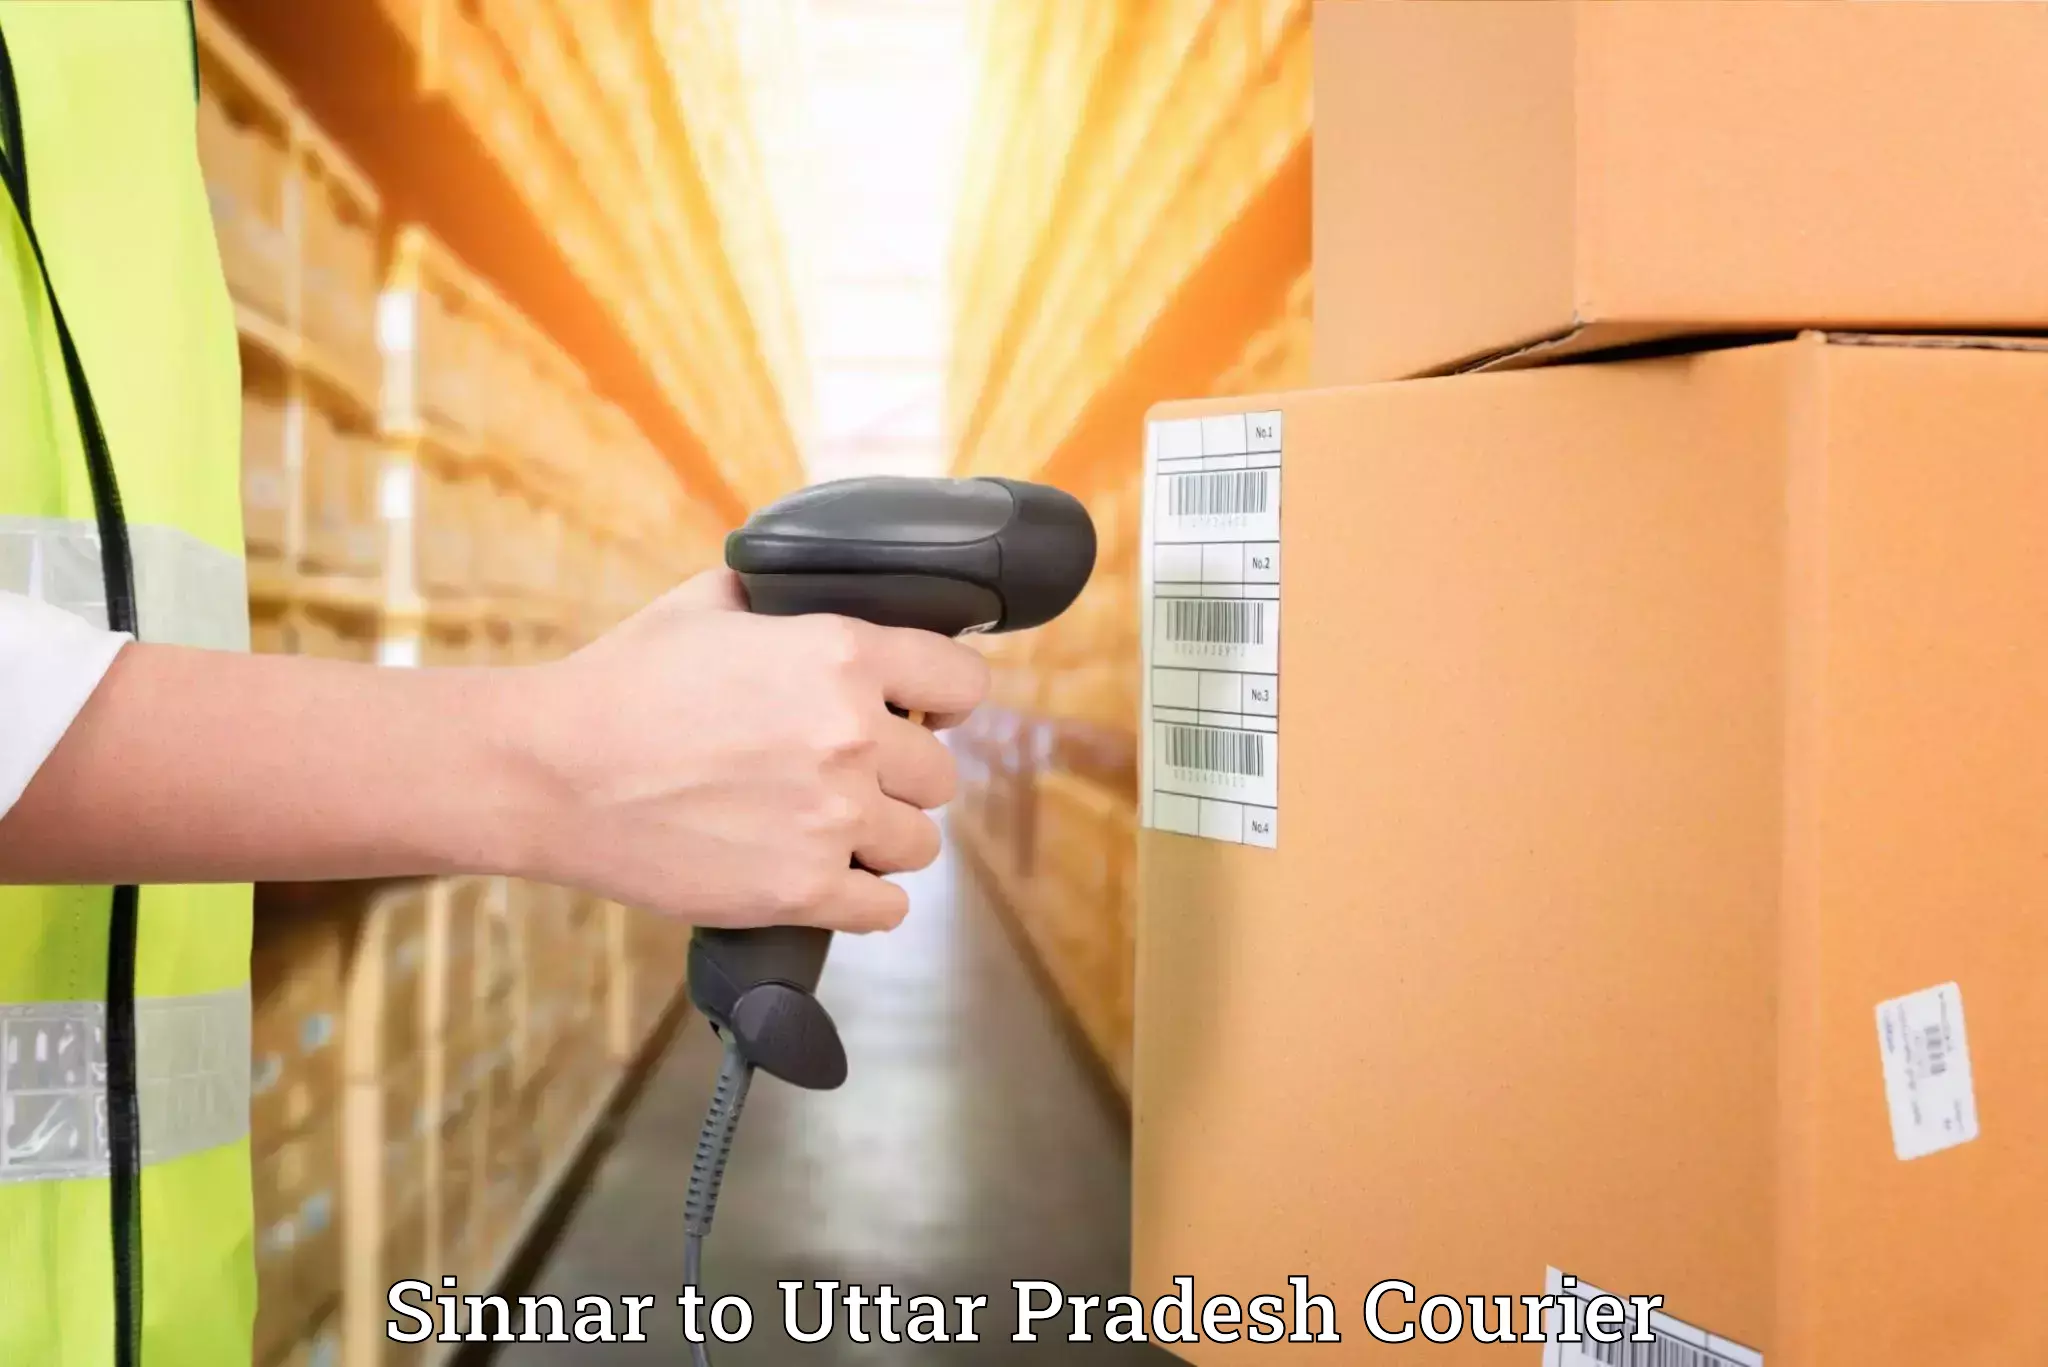 Furniture moving experts Sinnar to Rath